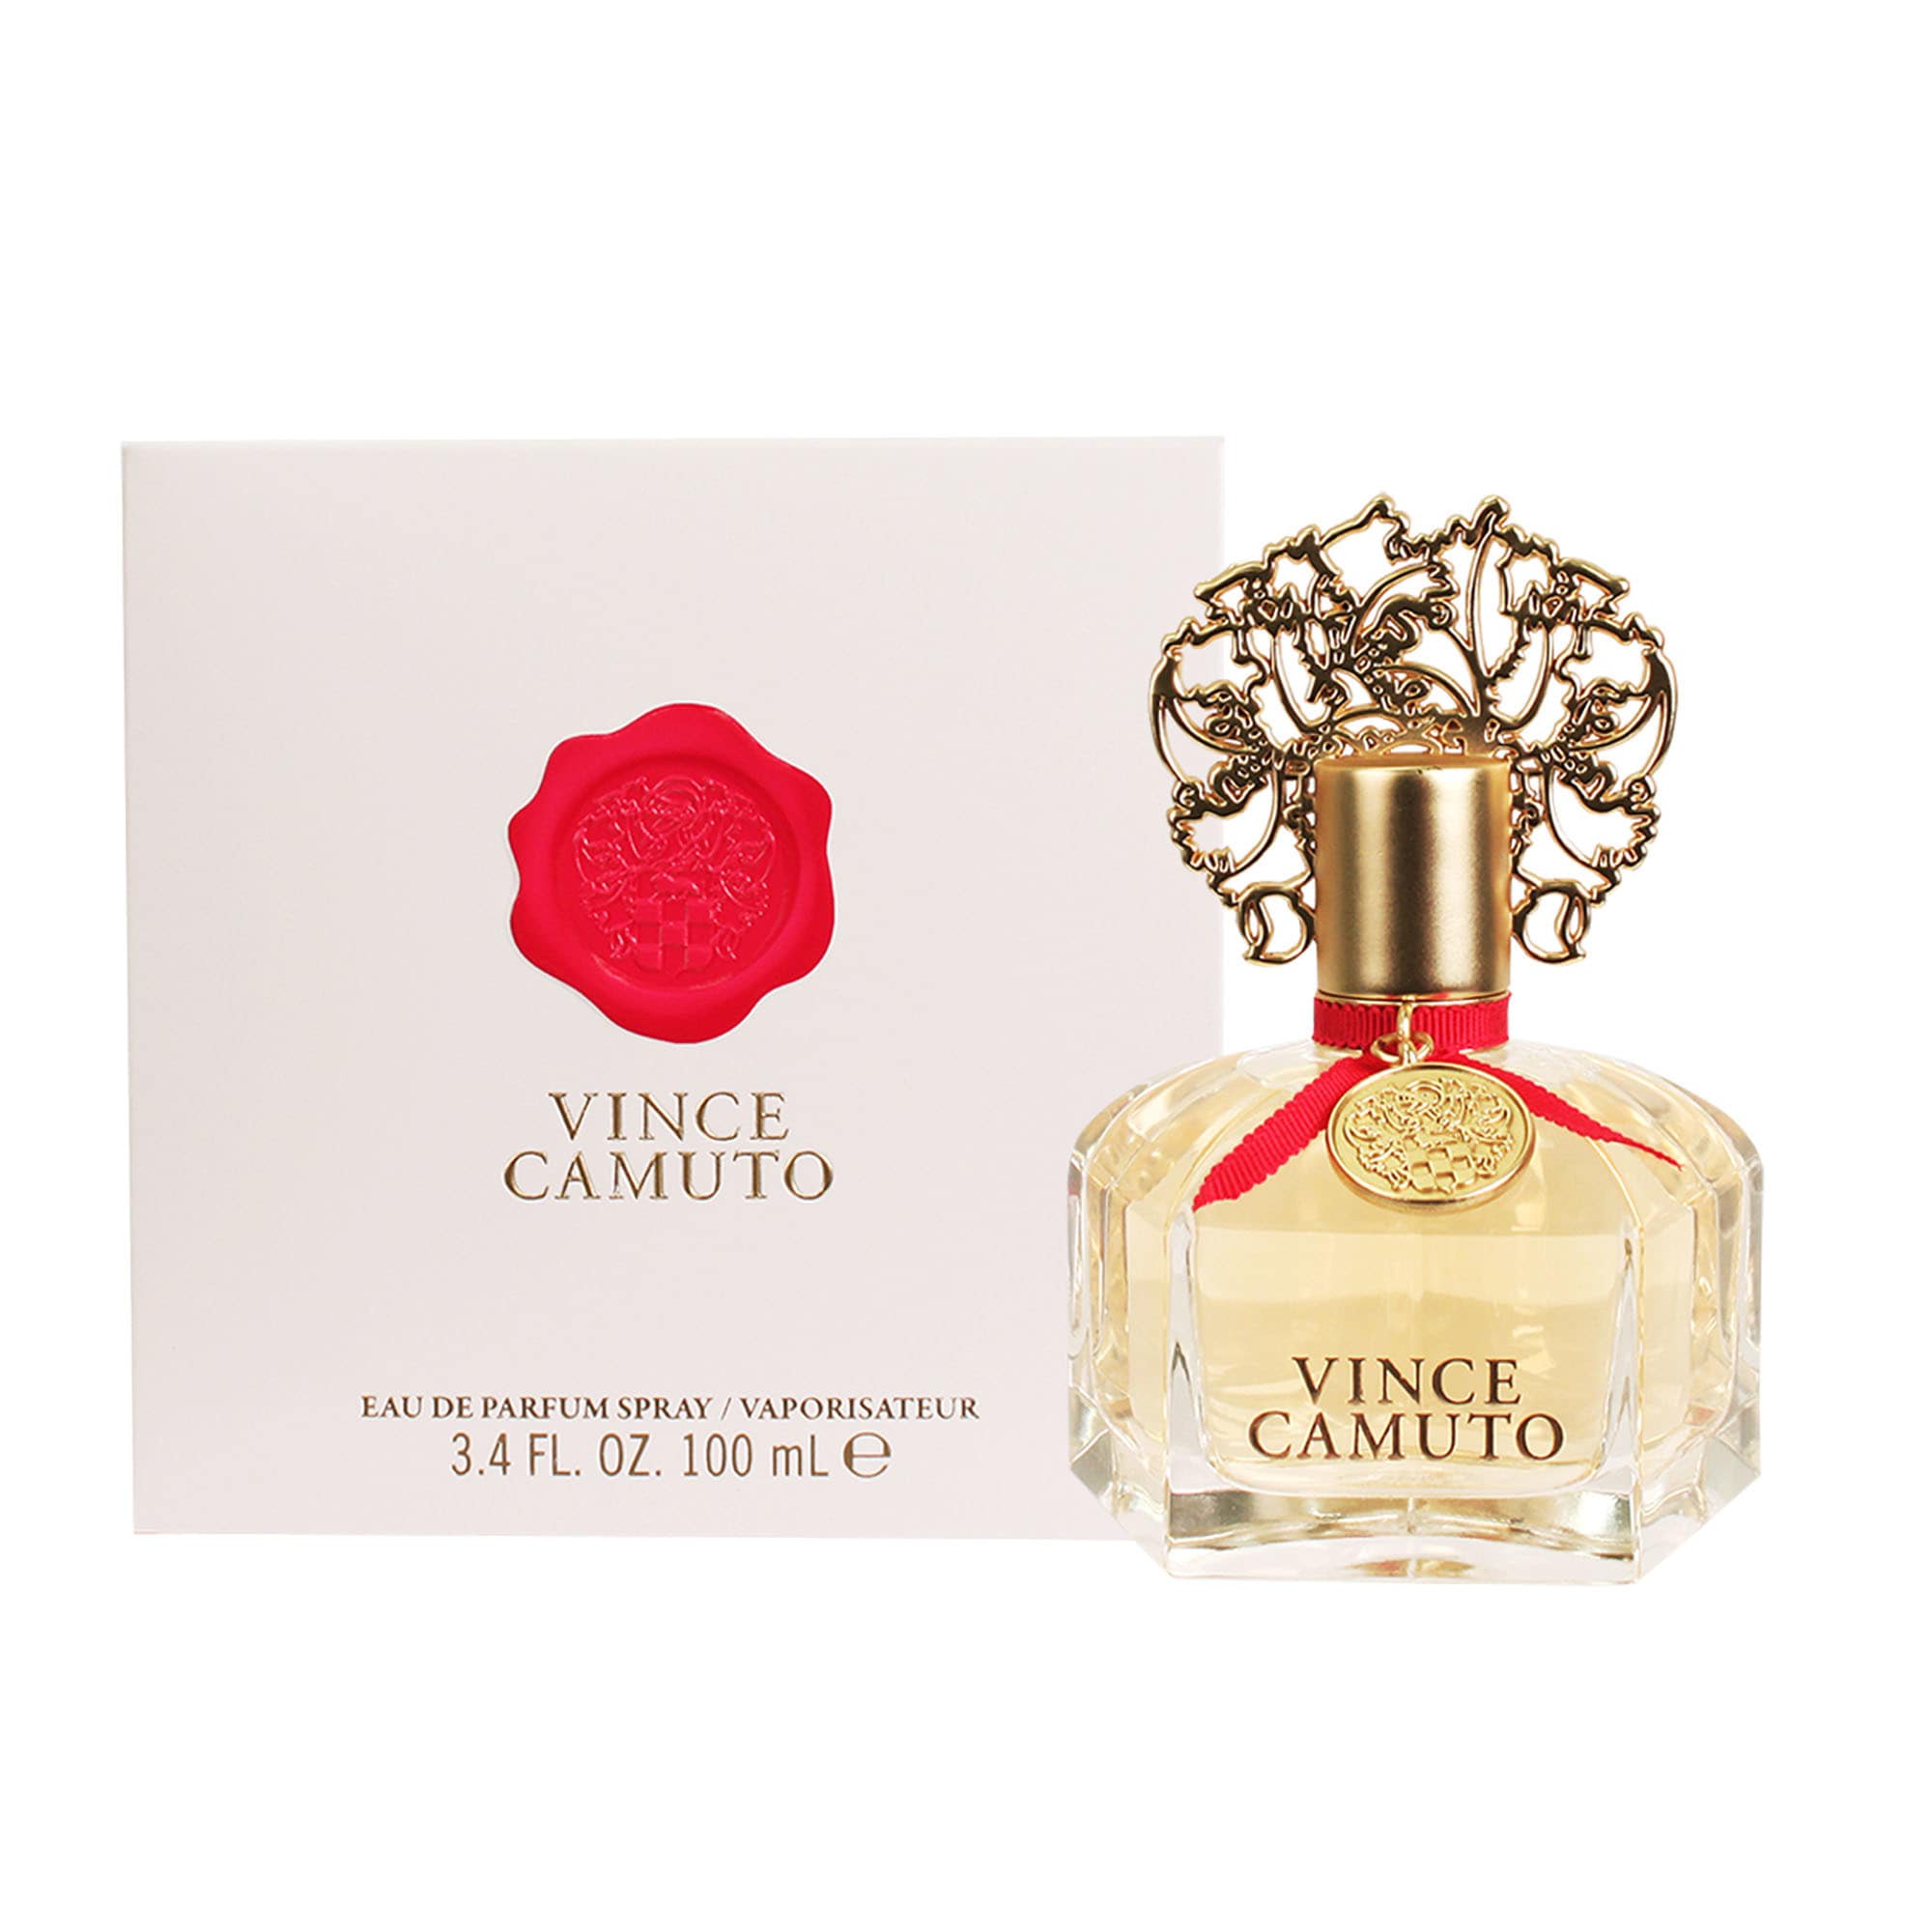 vince camuto perfume notes